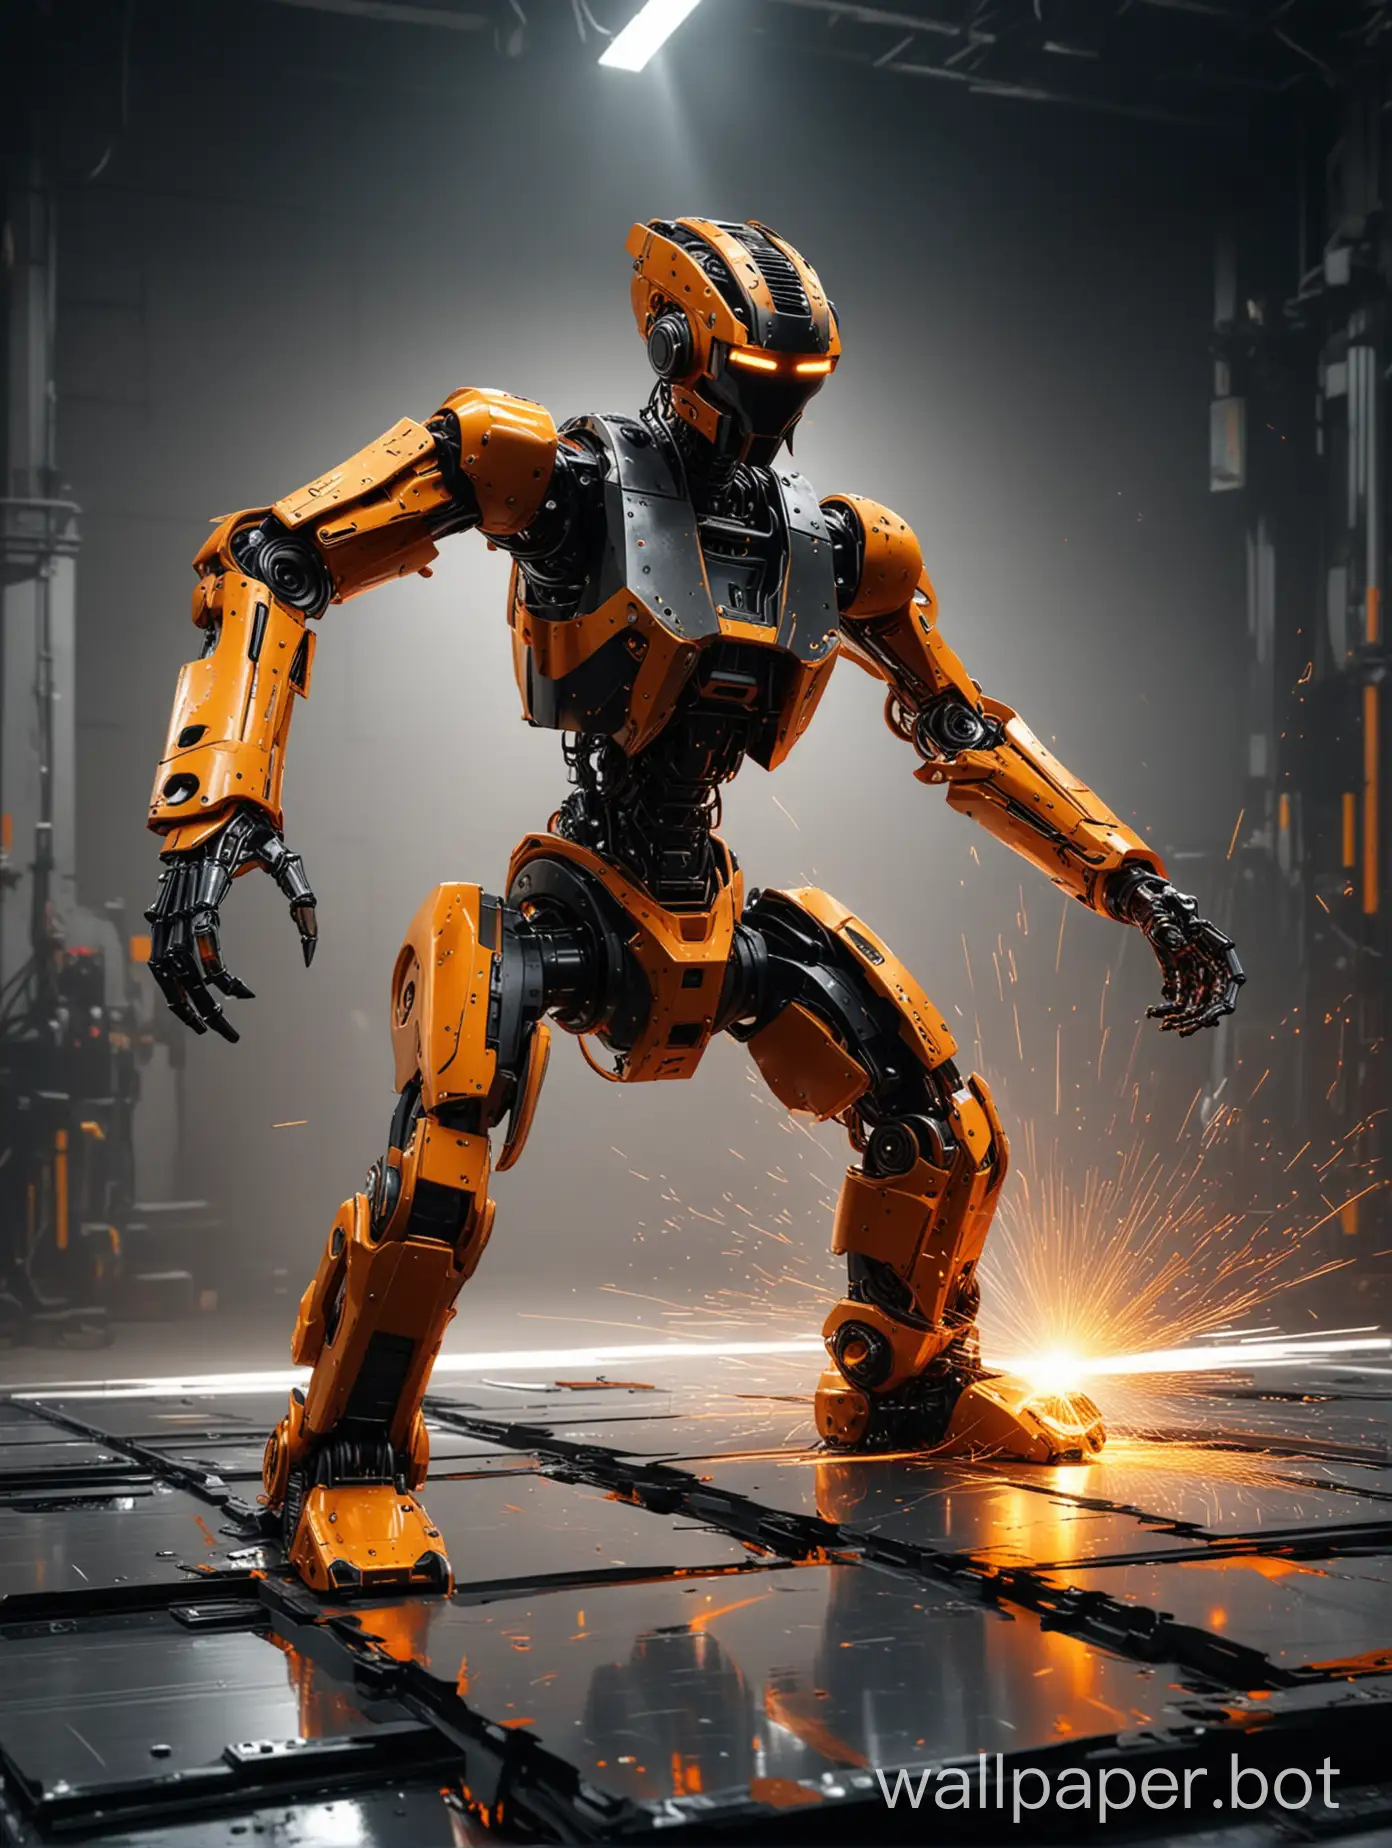 Industrial-Robot-AI-Cutting-and-Bending-Metal-Sheets-in-Laser-Orange-and-Black-Style